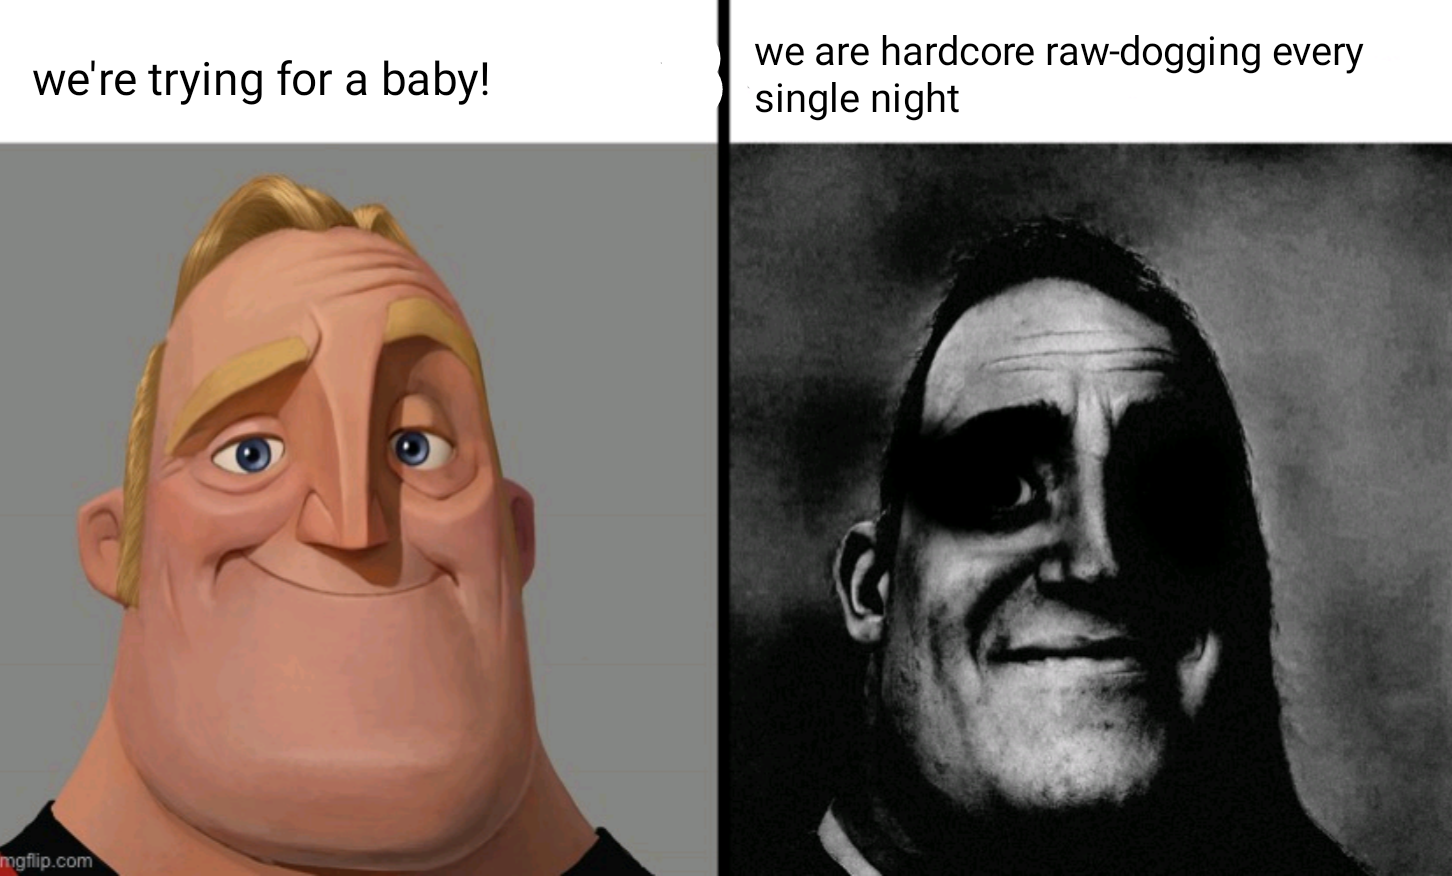 dark mr incredible meme template - we're trying for a baby! we are hardcore rawdogging every single night mgflip.com